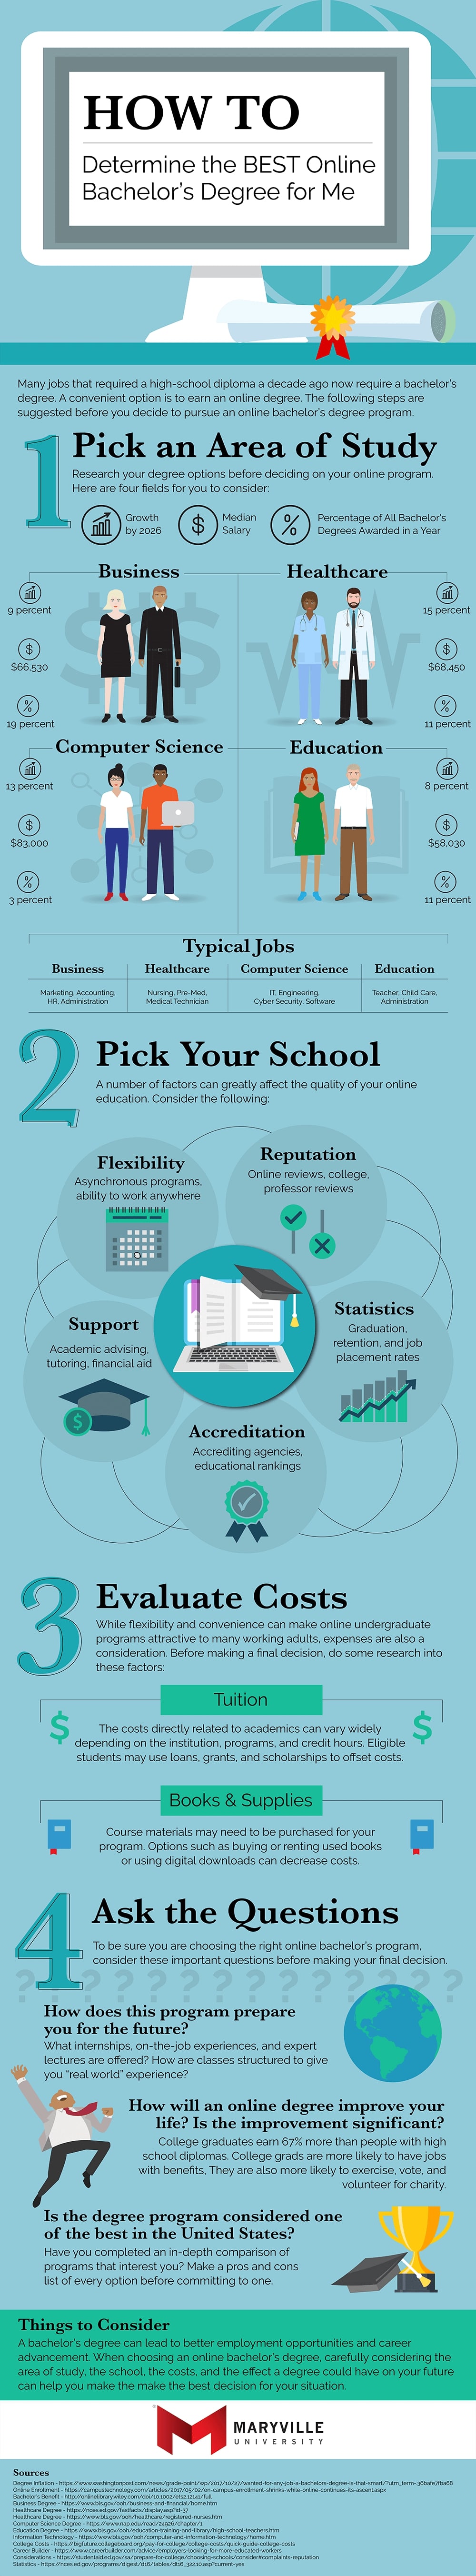 How to Determine the Best Online Bachelor's Degree in 4 Steps Infographic